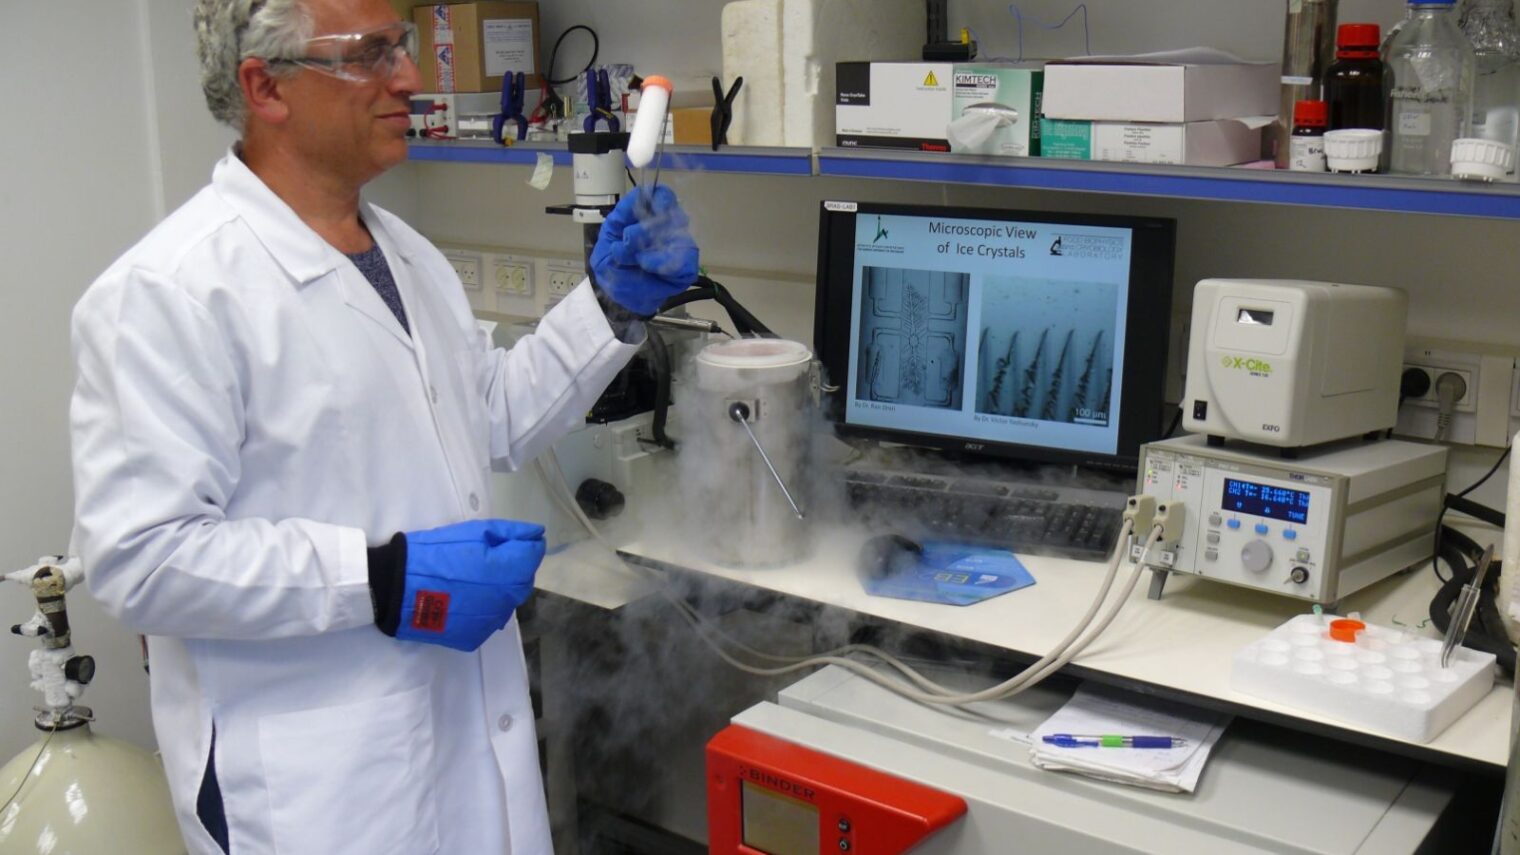 Prof. Ido Braslavsky at his Hebrew University lab, where his team investigates ice-binding proteins and new methods in cryopreservation of cells and tissues. Photo by Amir Bein